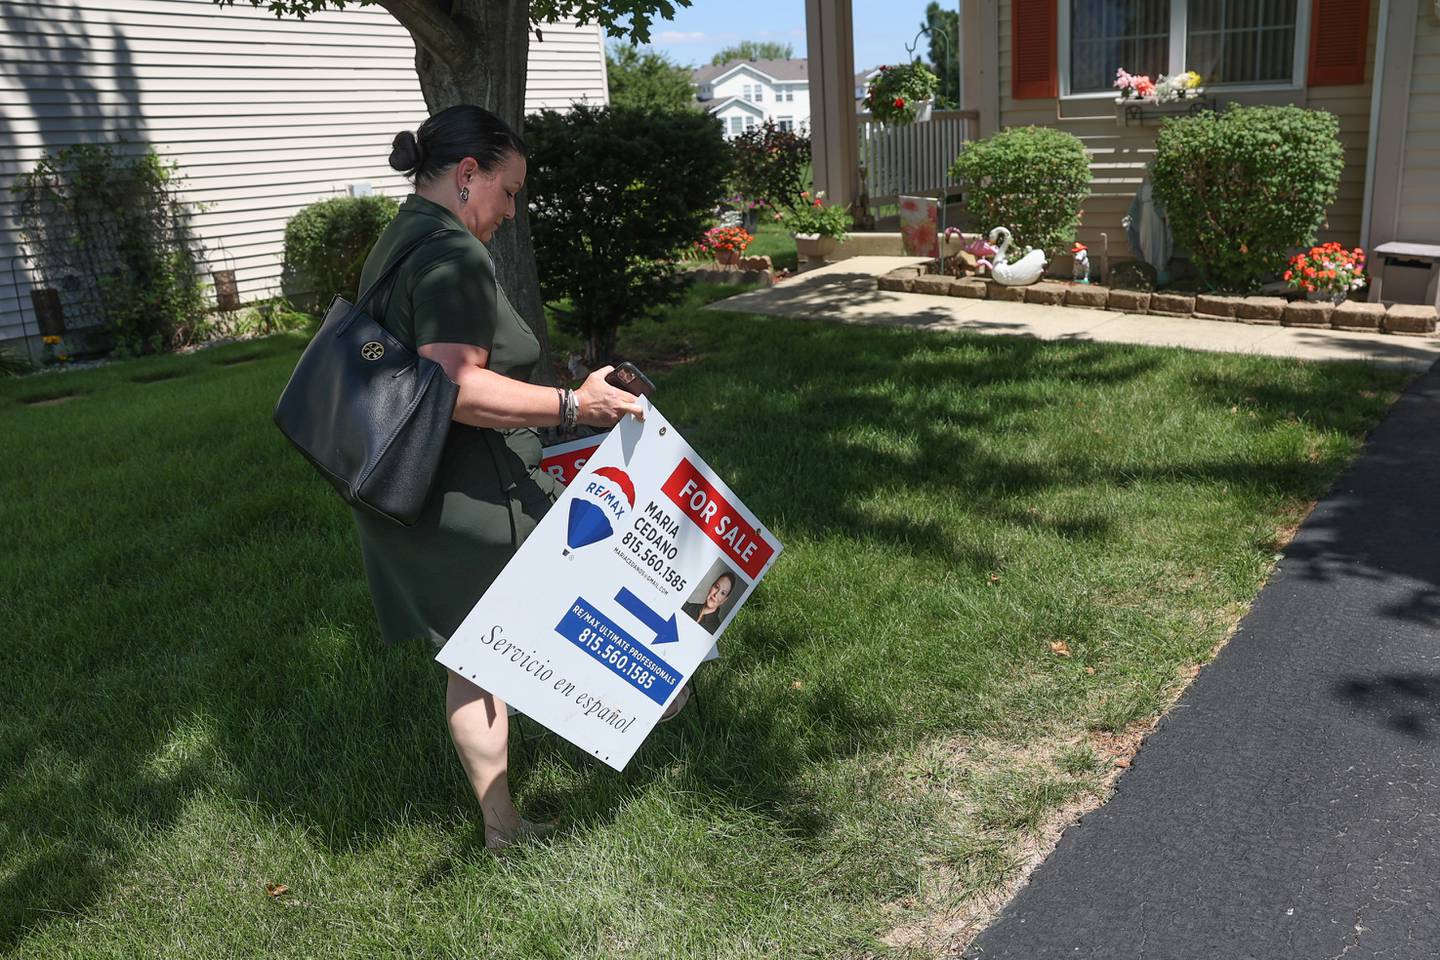 Maria Cedano, a realtor with ReMax, puts up a For Sale sign in the yard of a home in Crest Hill. Wednesday, Aug. 10, 2022, in Crest Hill.